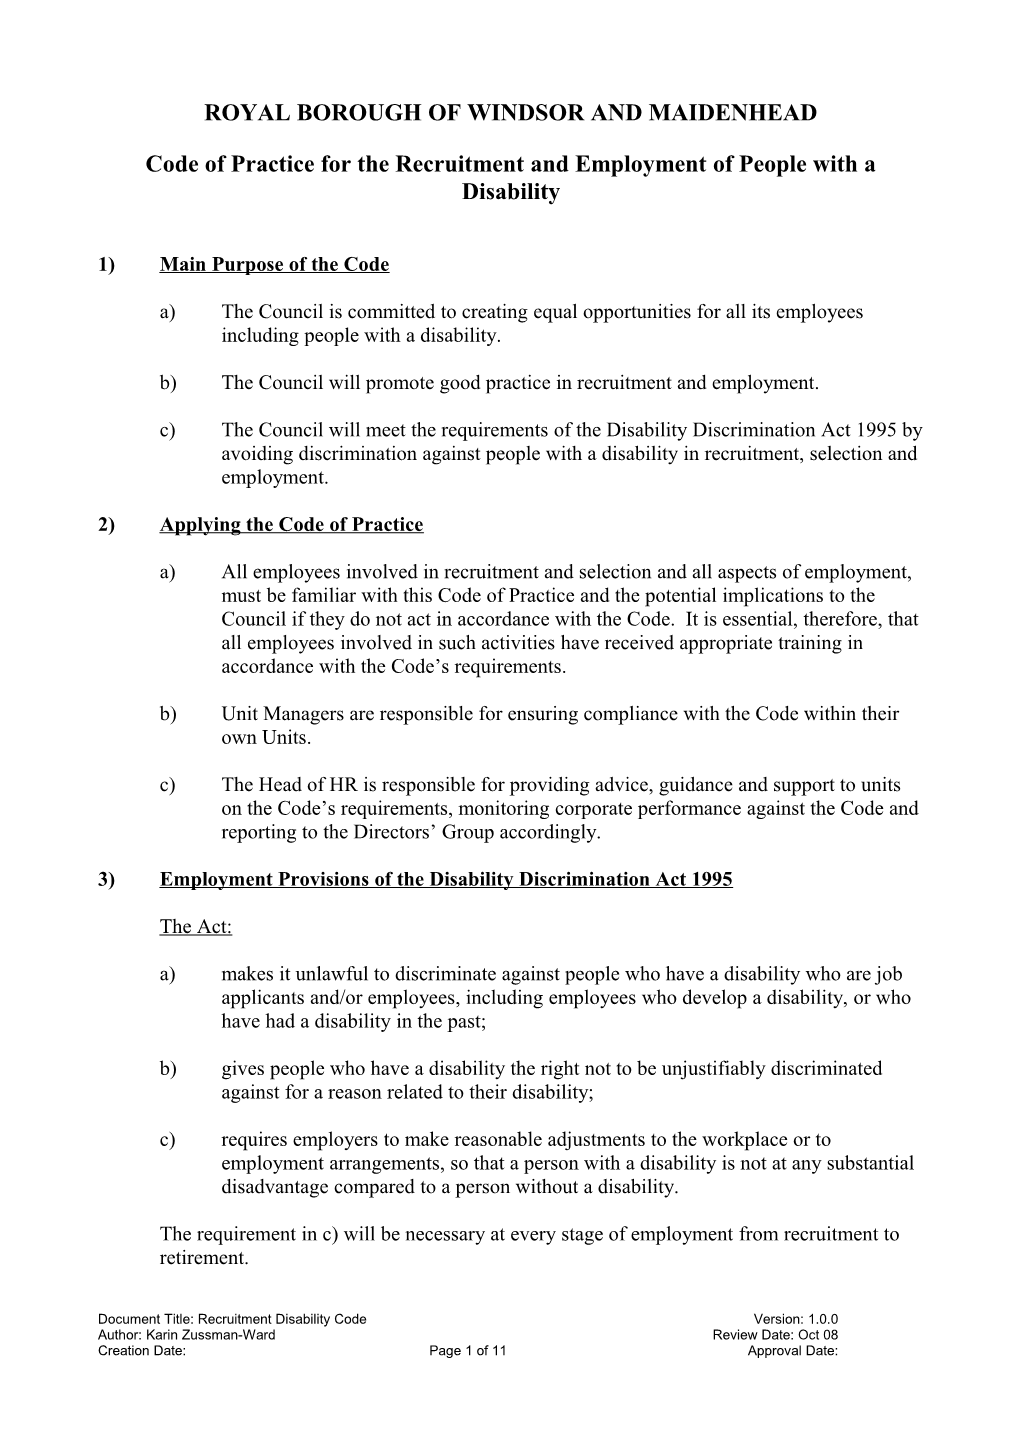 Code of Practice for the Recruitment and Employment of People with a Disability